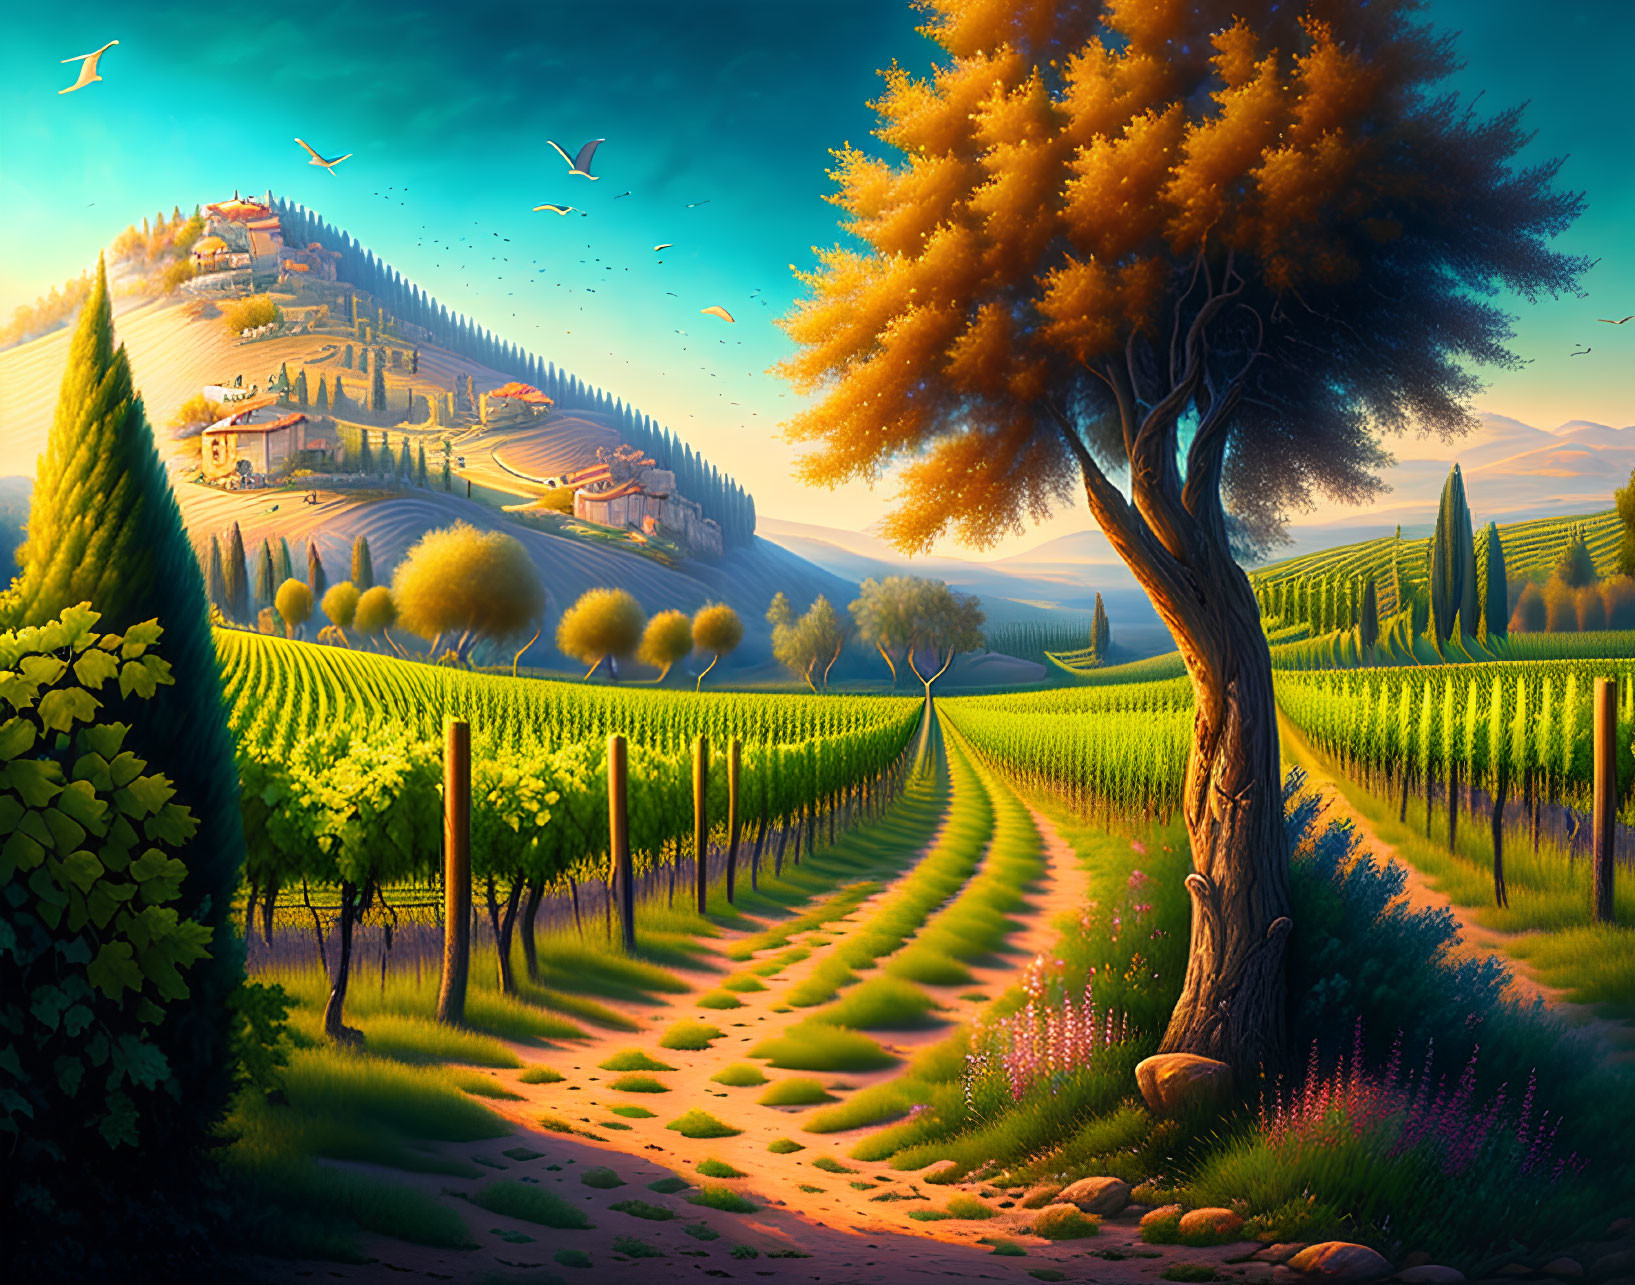 Scenic vineyard landscape with orange tree, hills, and buildings